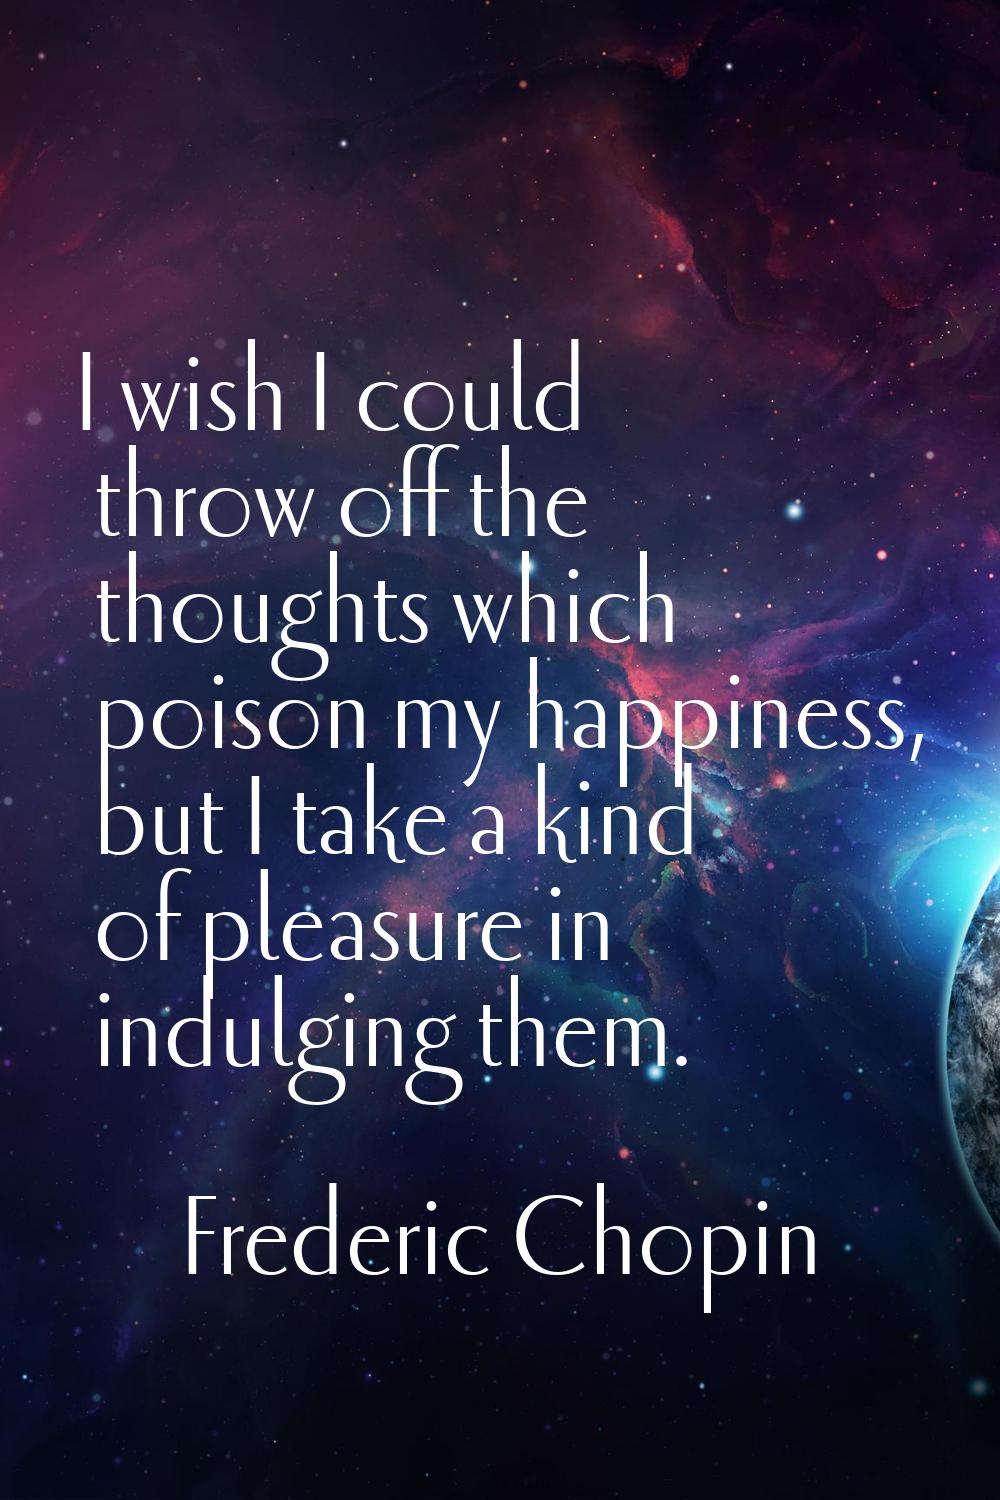 I wish I could throw off the thoughts which poison my happiness, but I take a kind of pleasure in i